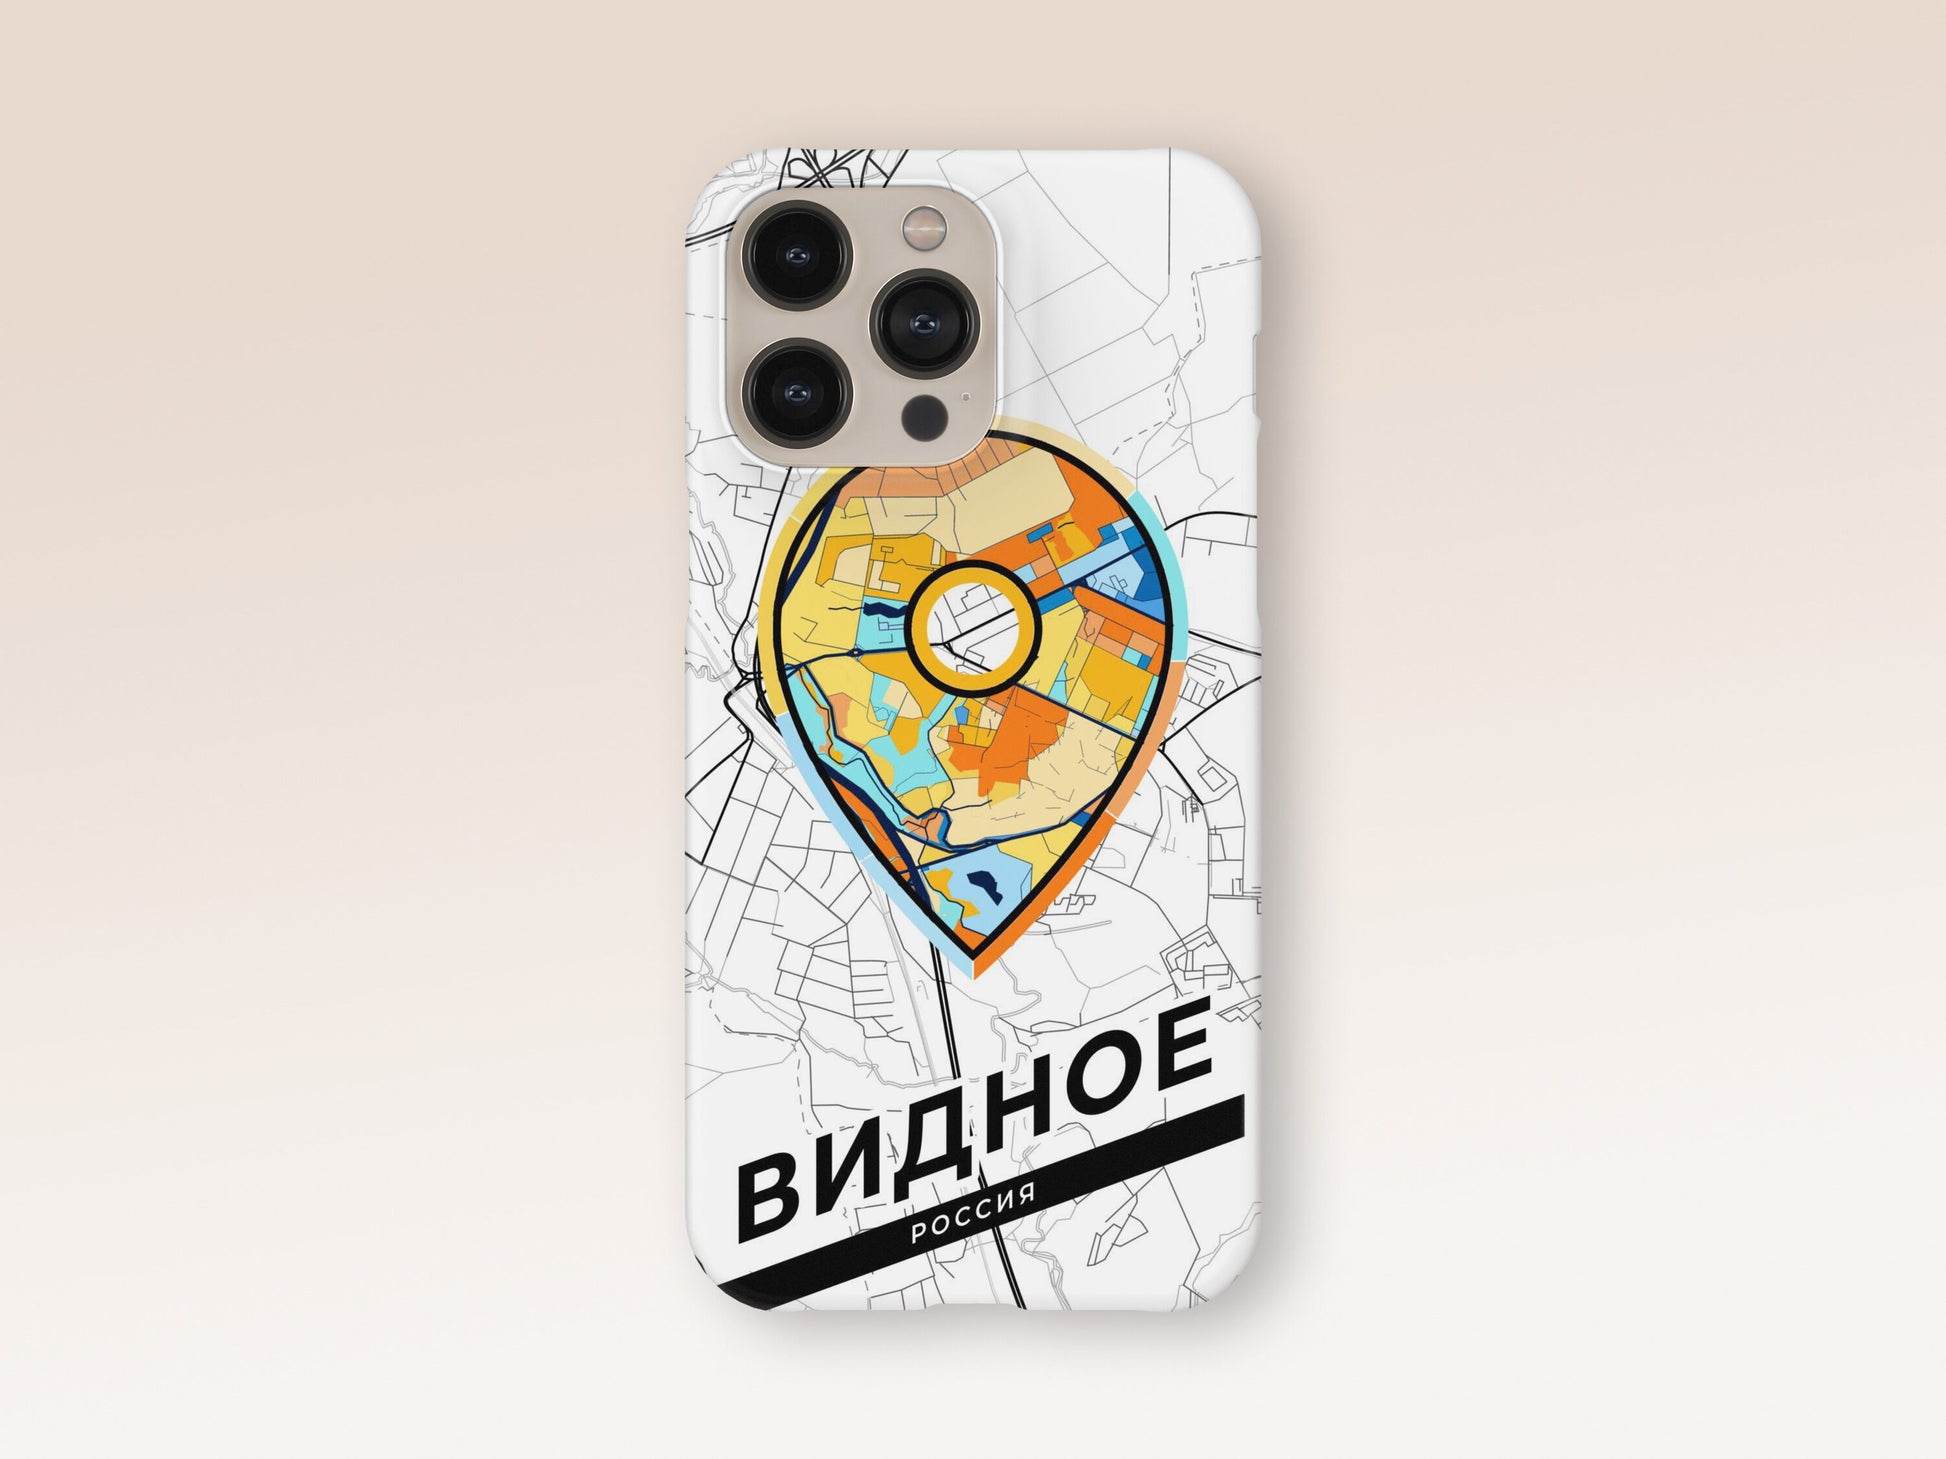 Vidnoye Russia slim phone case with colorful icon 1